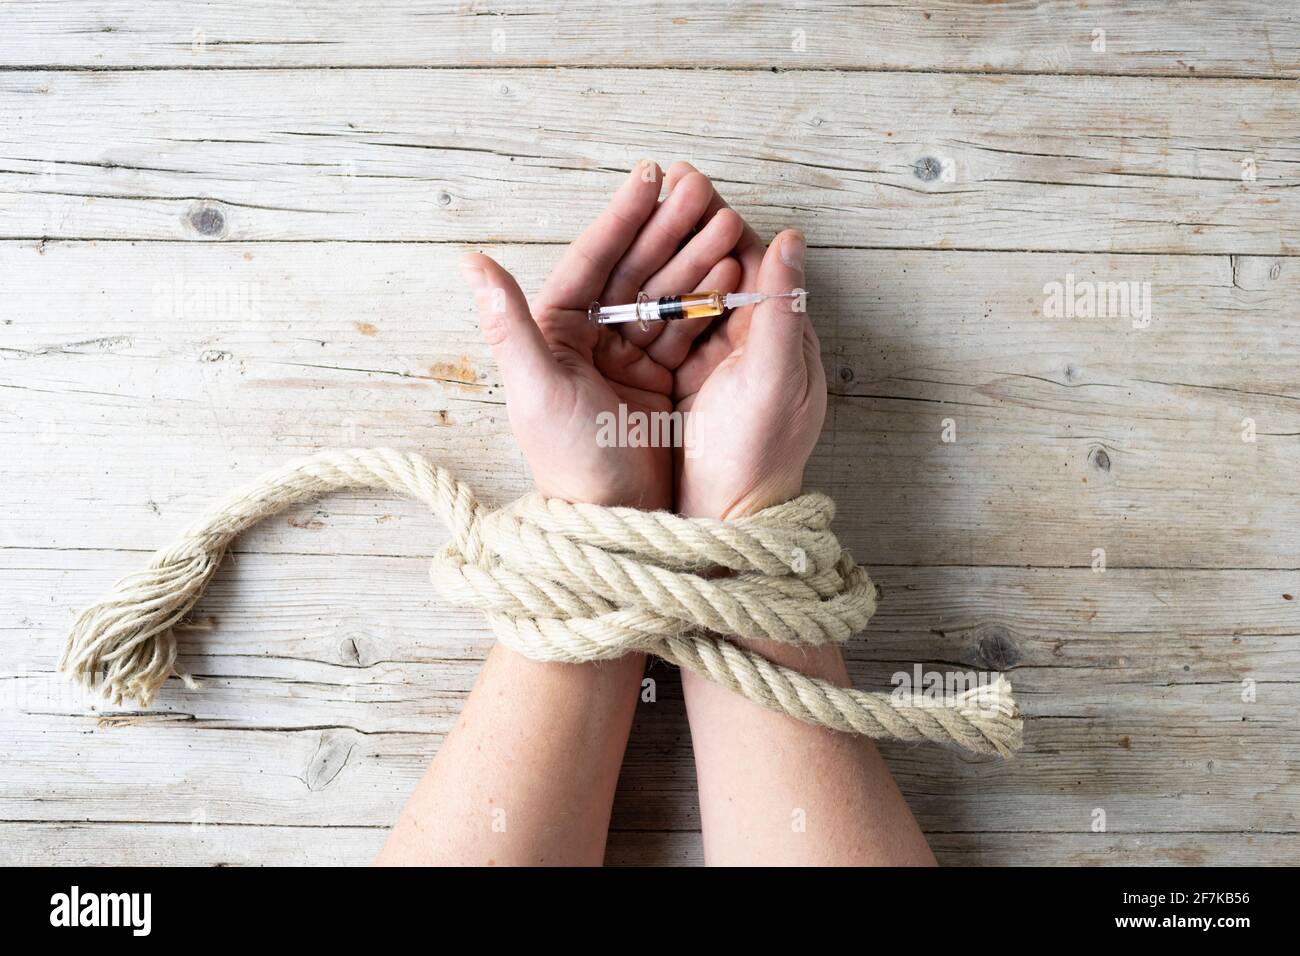 male hands are tied and hold syringe, concept addiction, drugs, drug addiction, photo taken from above Stock Photo